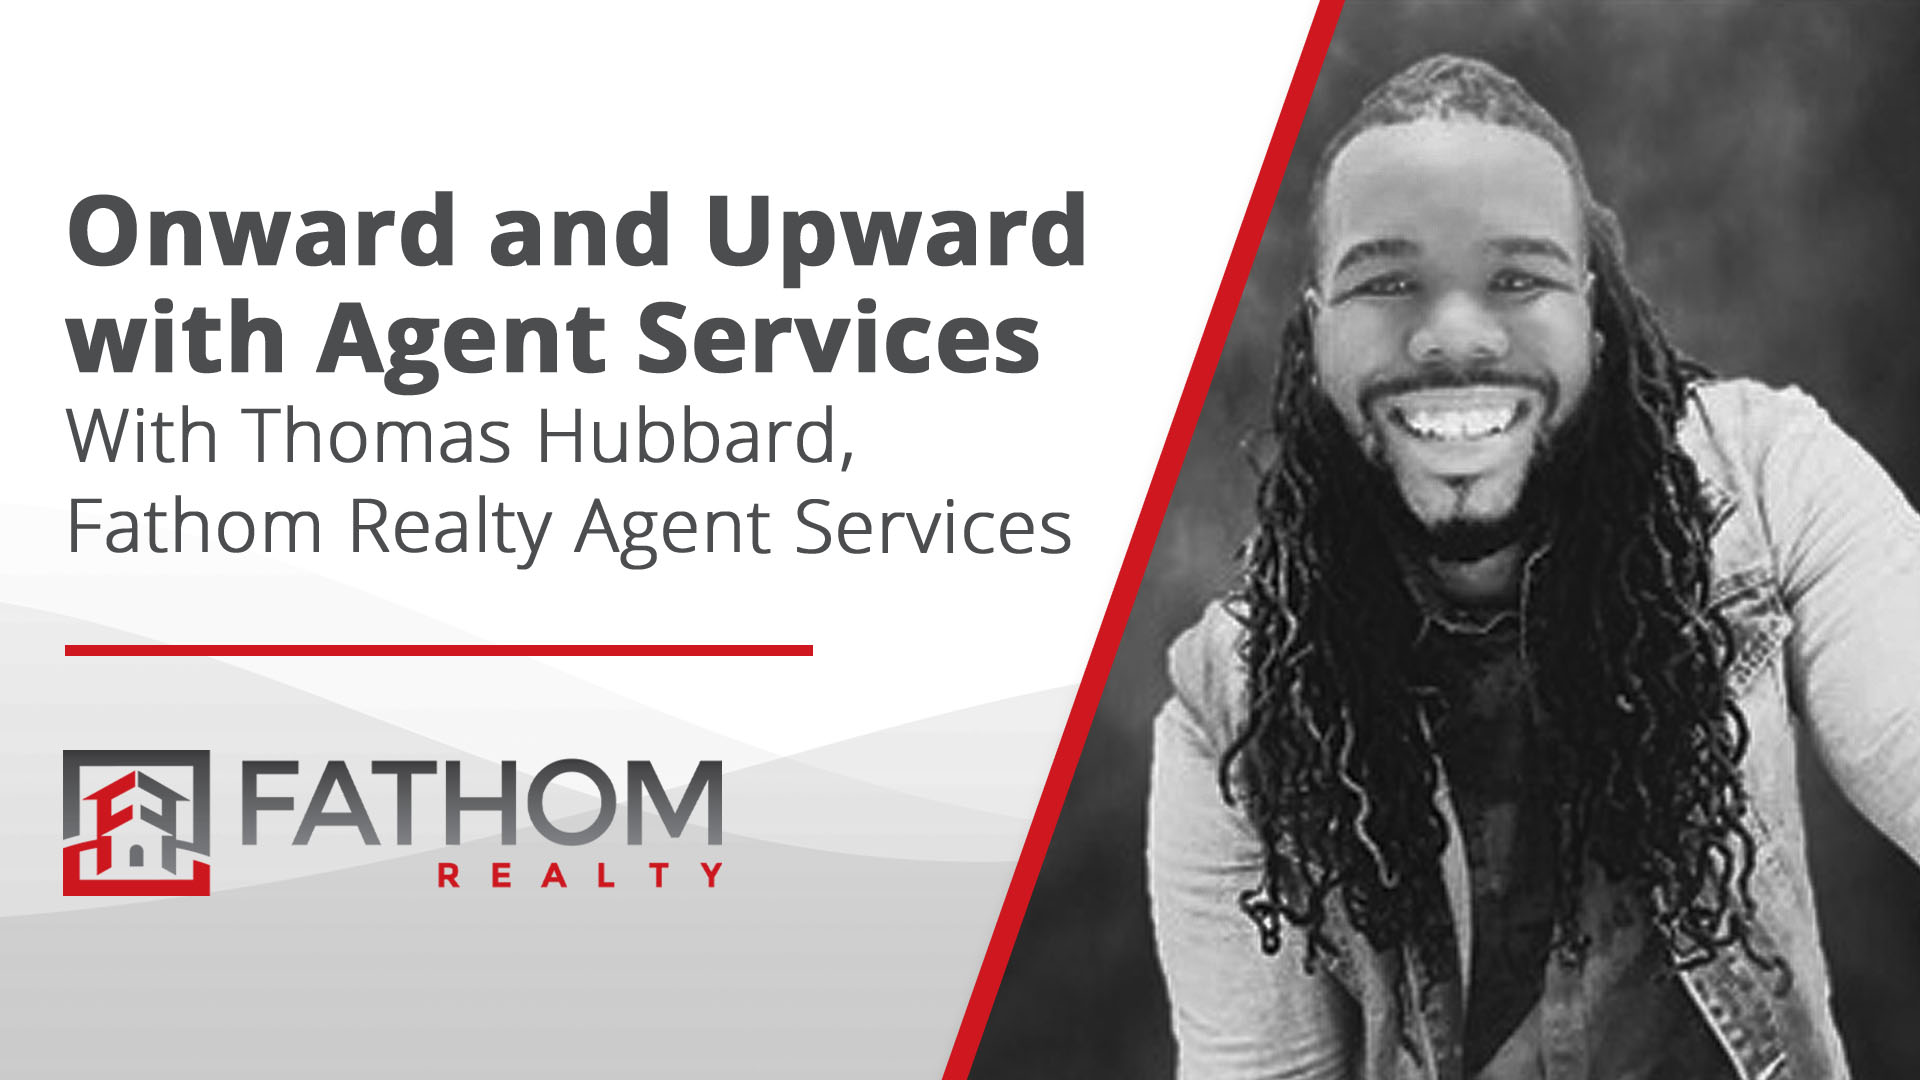 Featured image for “Onward and Upward with Agent Services”